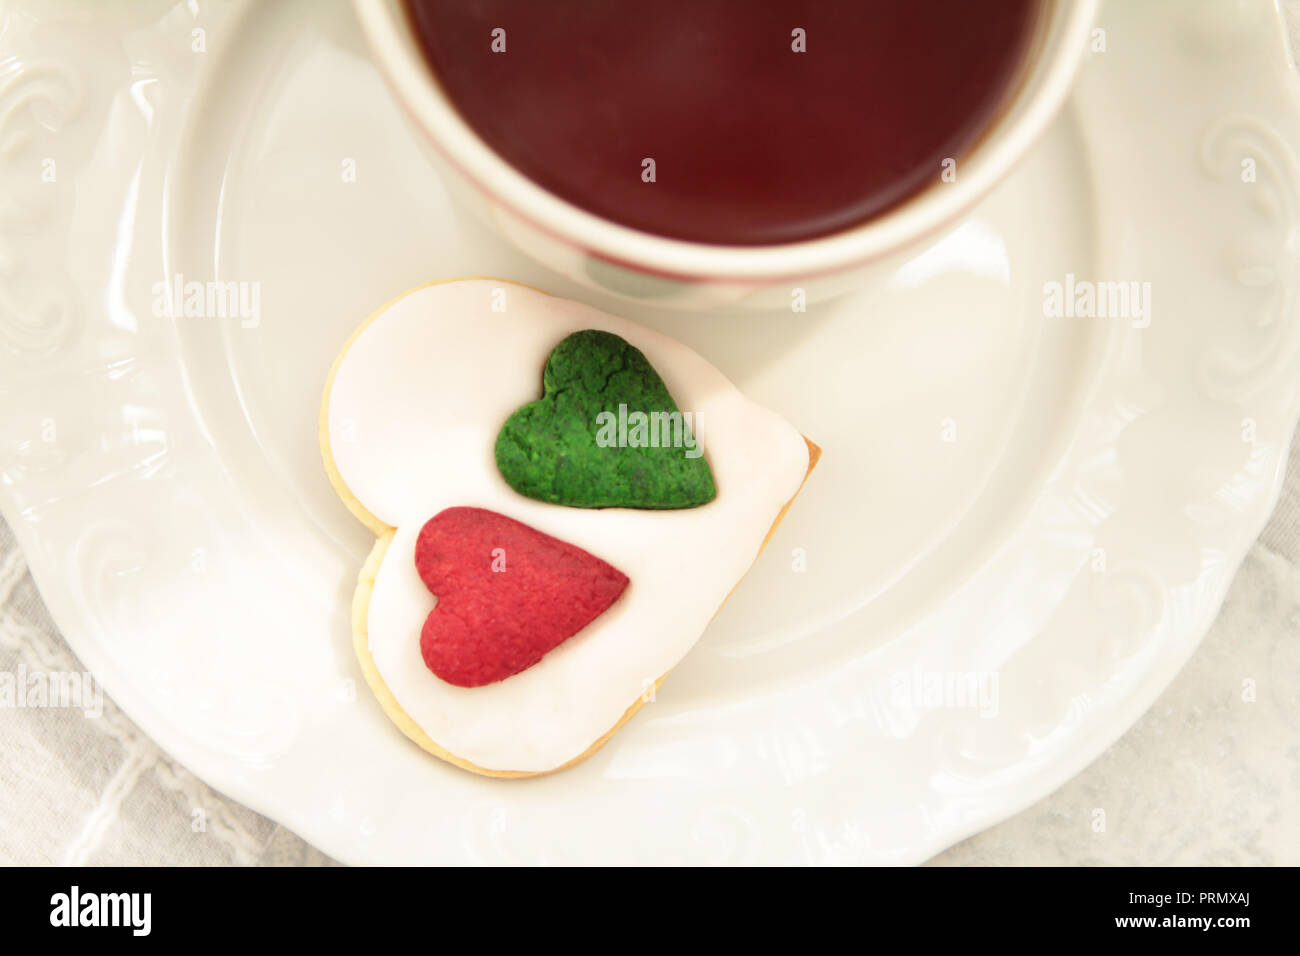 Porcelain cup of tea and sweet homemade heart shape cookies on cloth surface close up  cropped view, selective focus Stock Photo